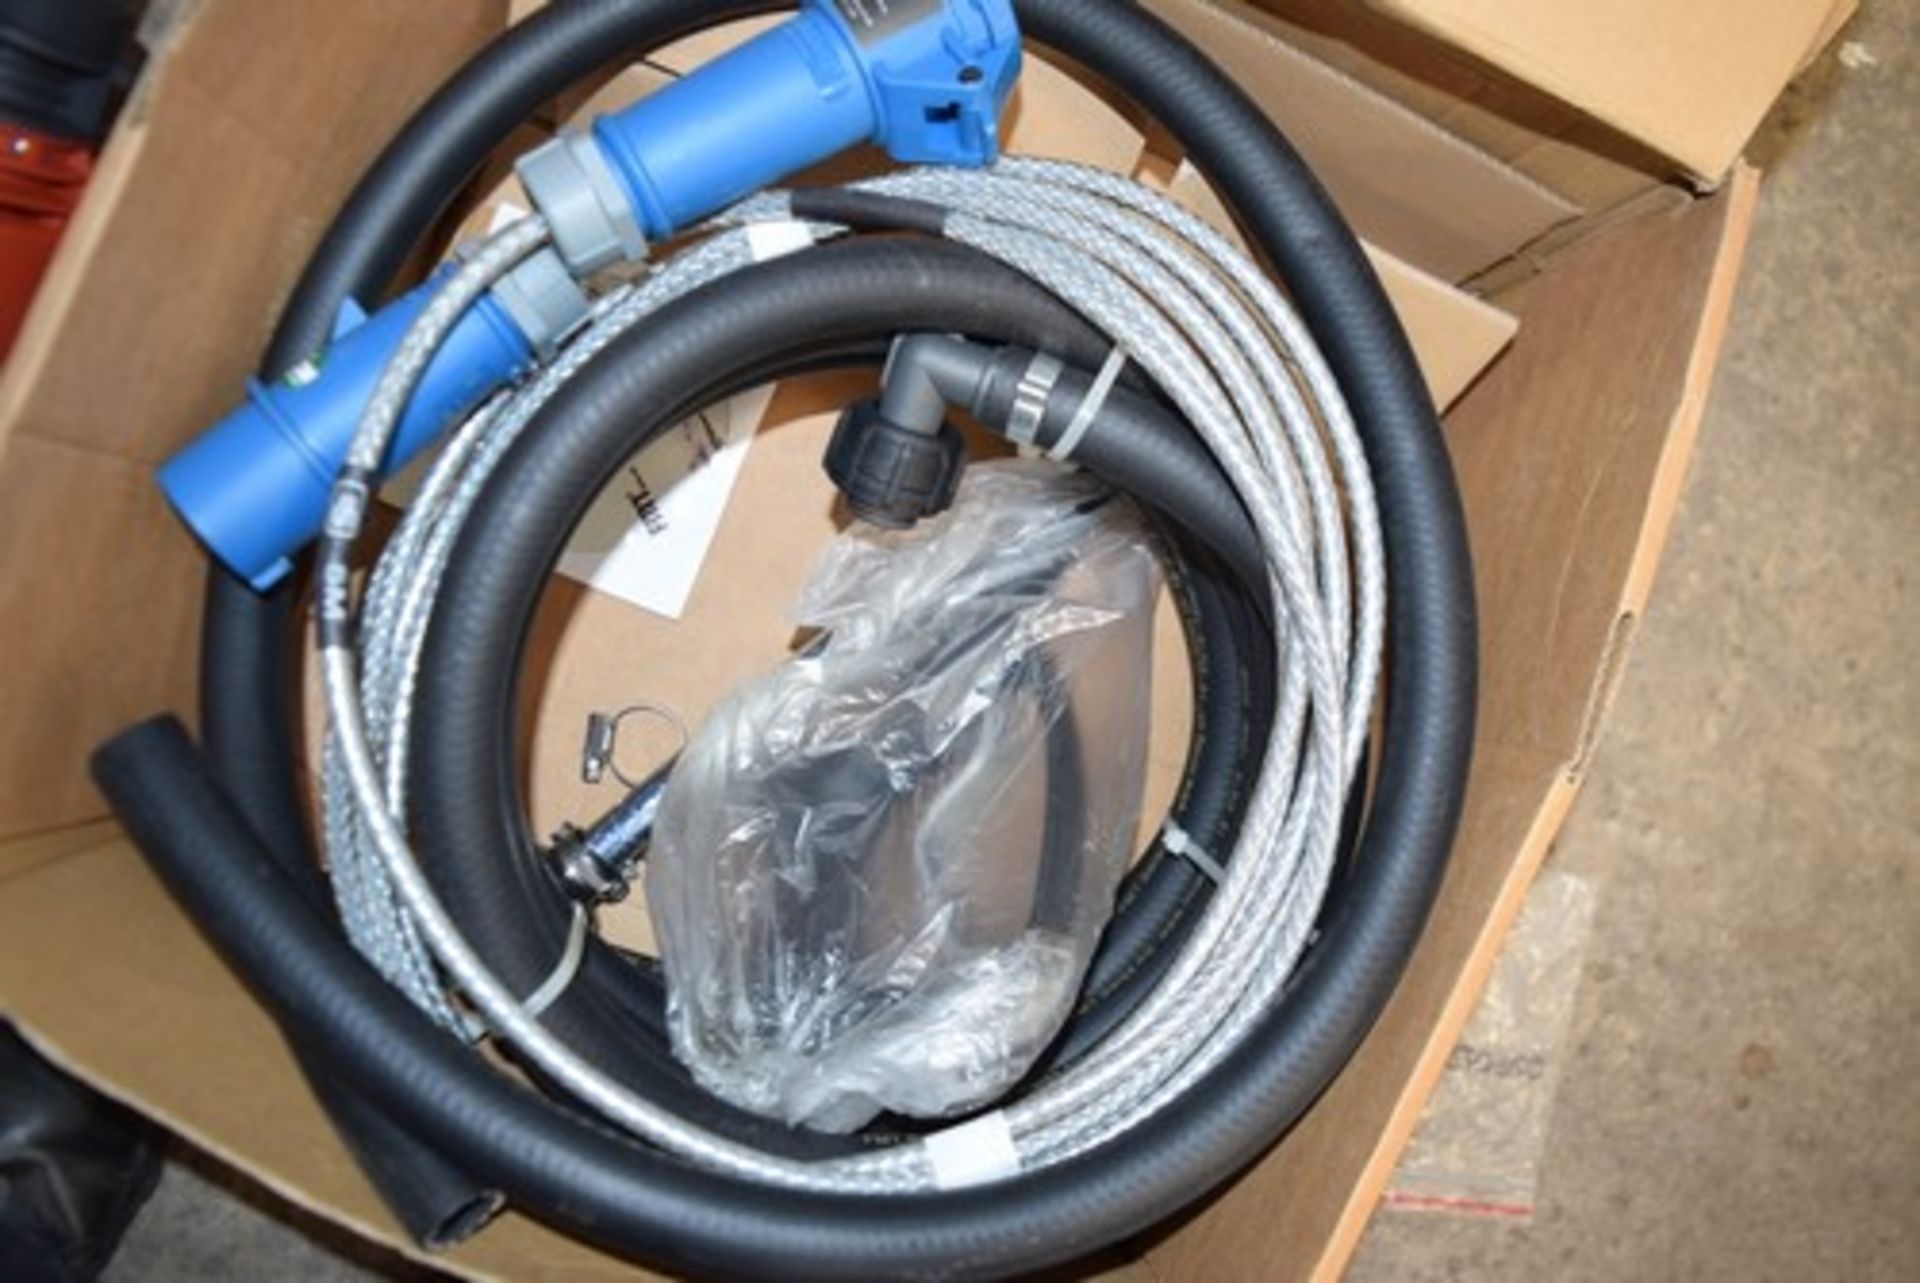 1 x Fluid Management Tech electric pump 23731 932, 240v, 52L P.H, pipe work and nozzle - new (GS1) - Image 3 of 3